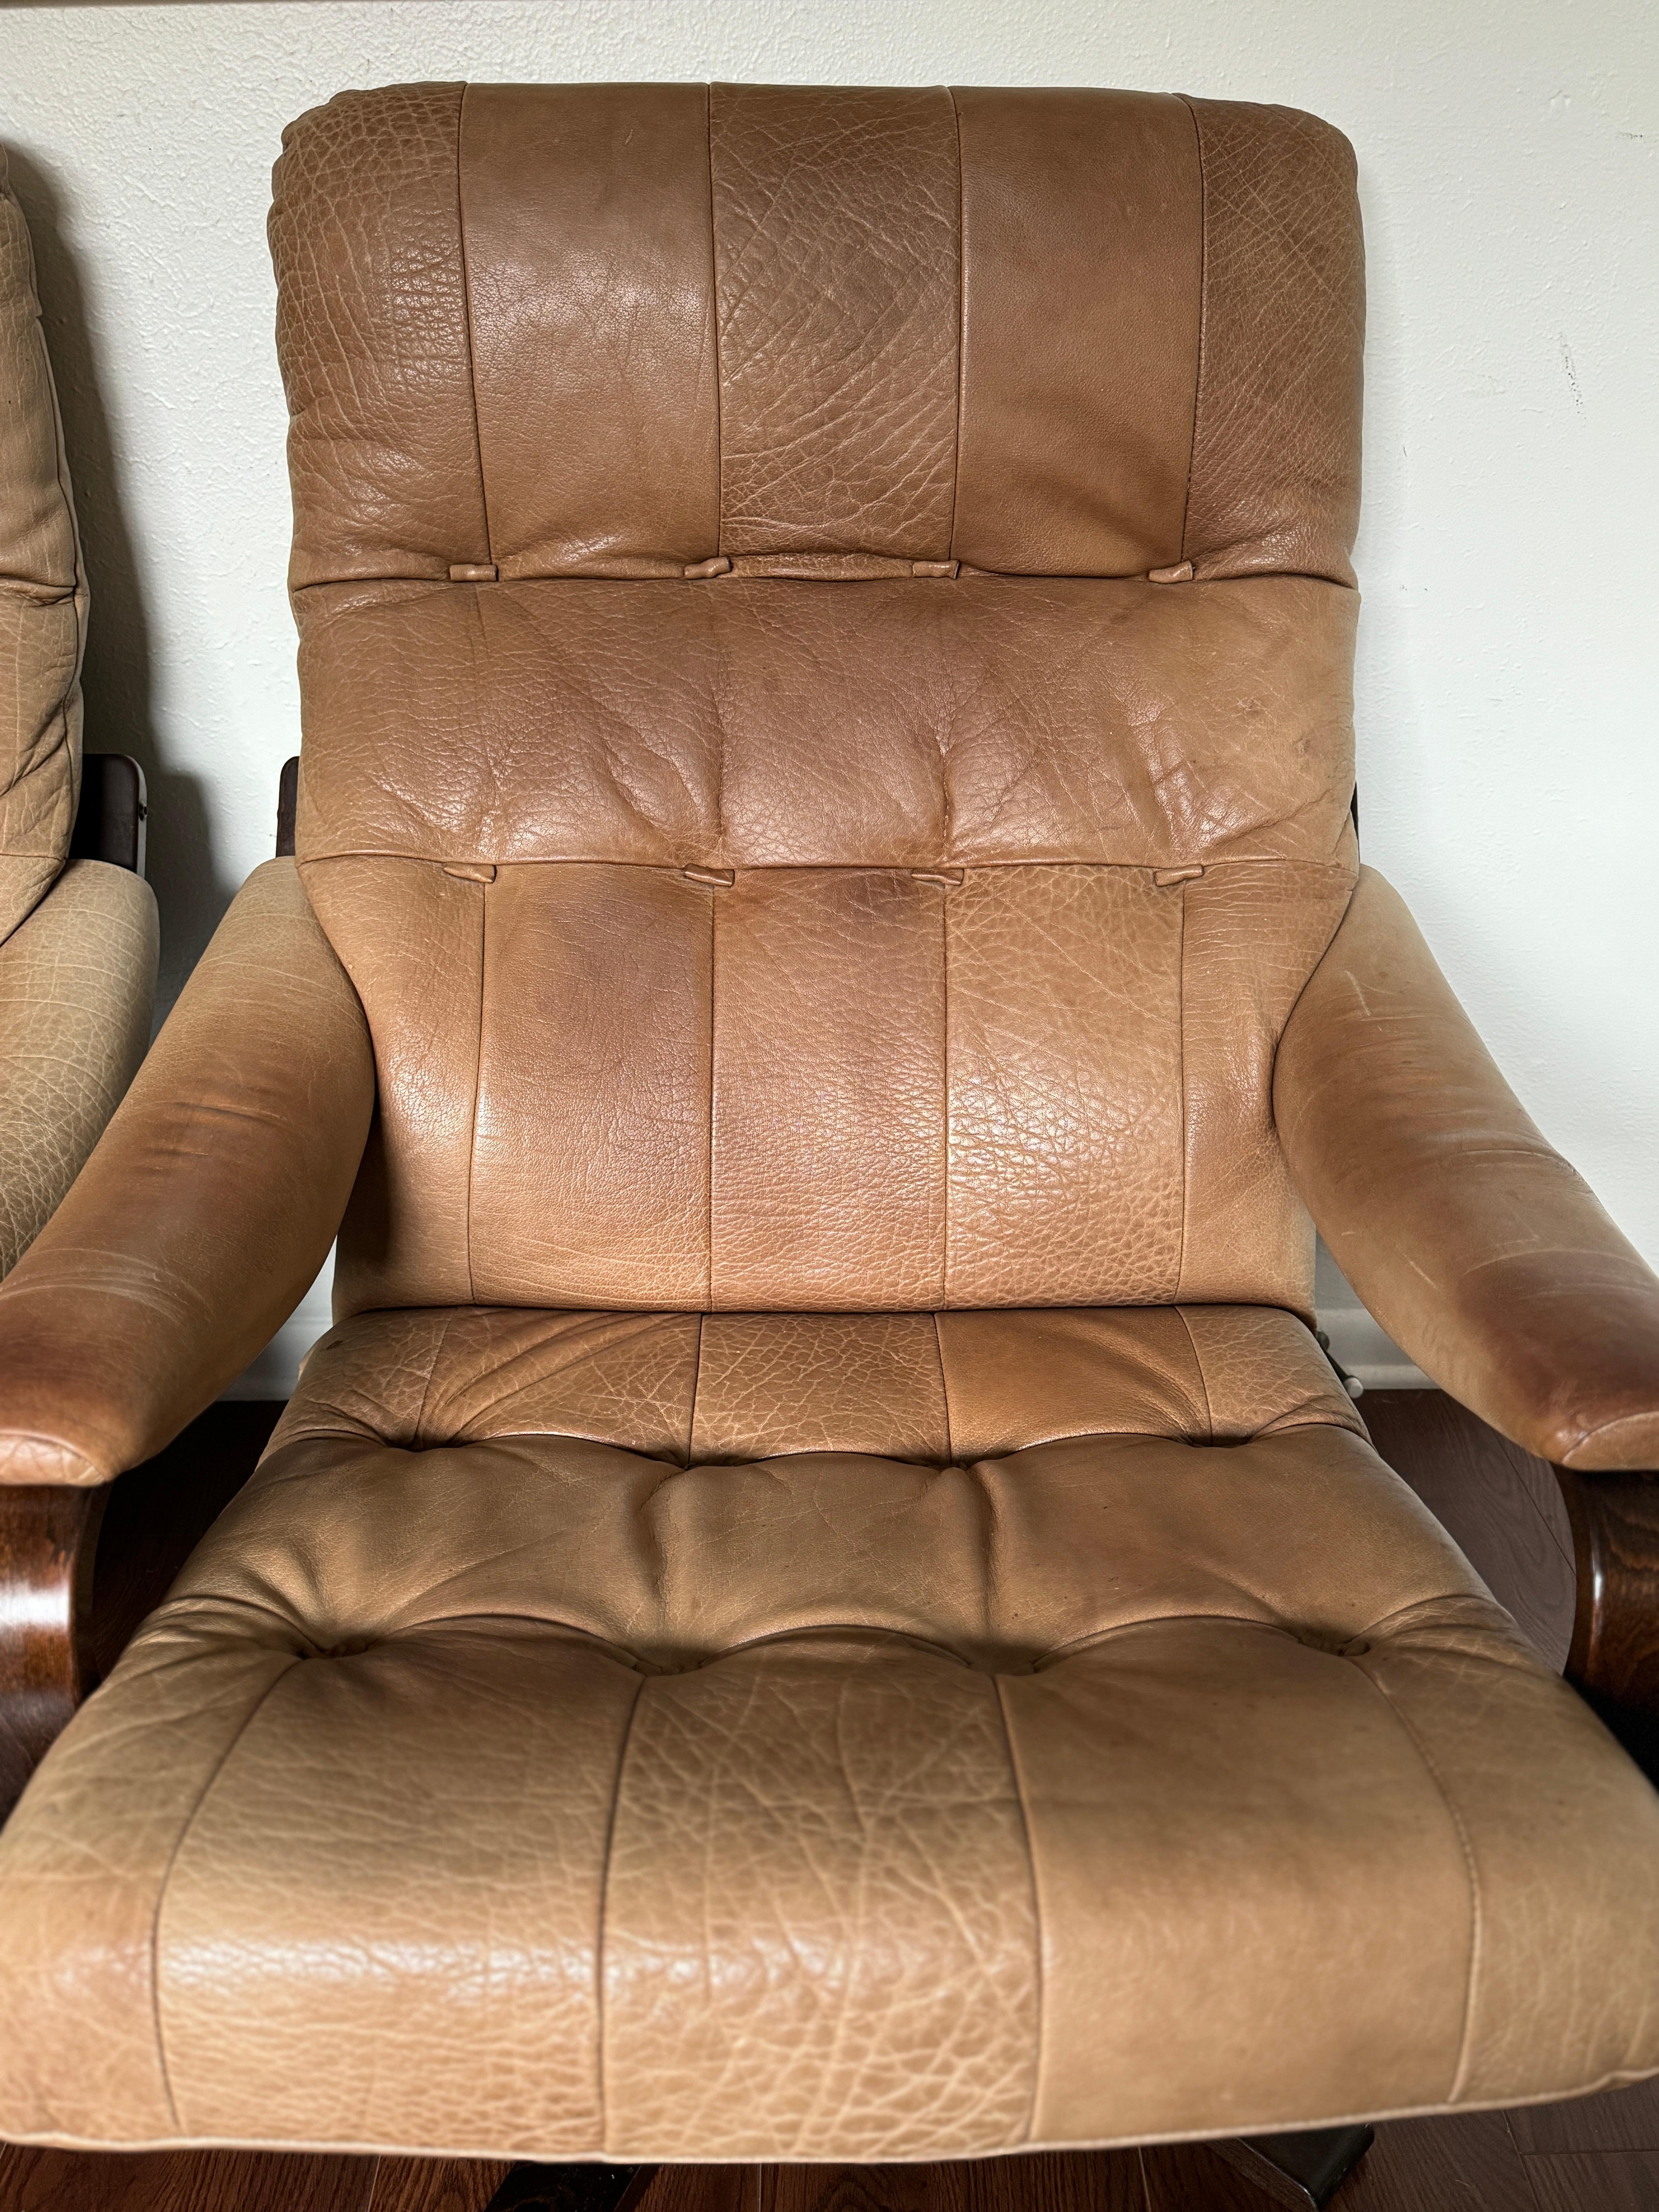 Lovely set of tan leather bentwood lounge chairs, circa 1970s. 6